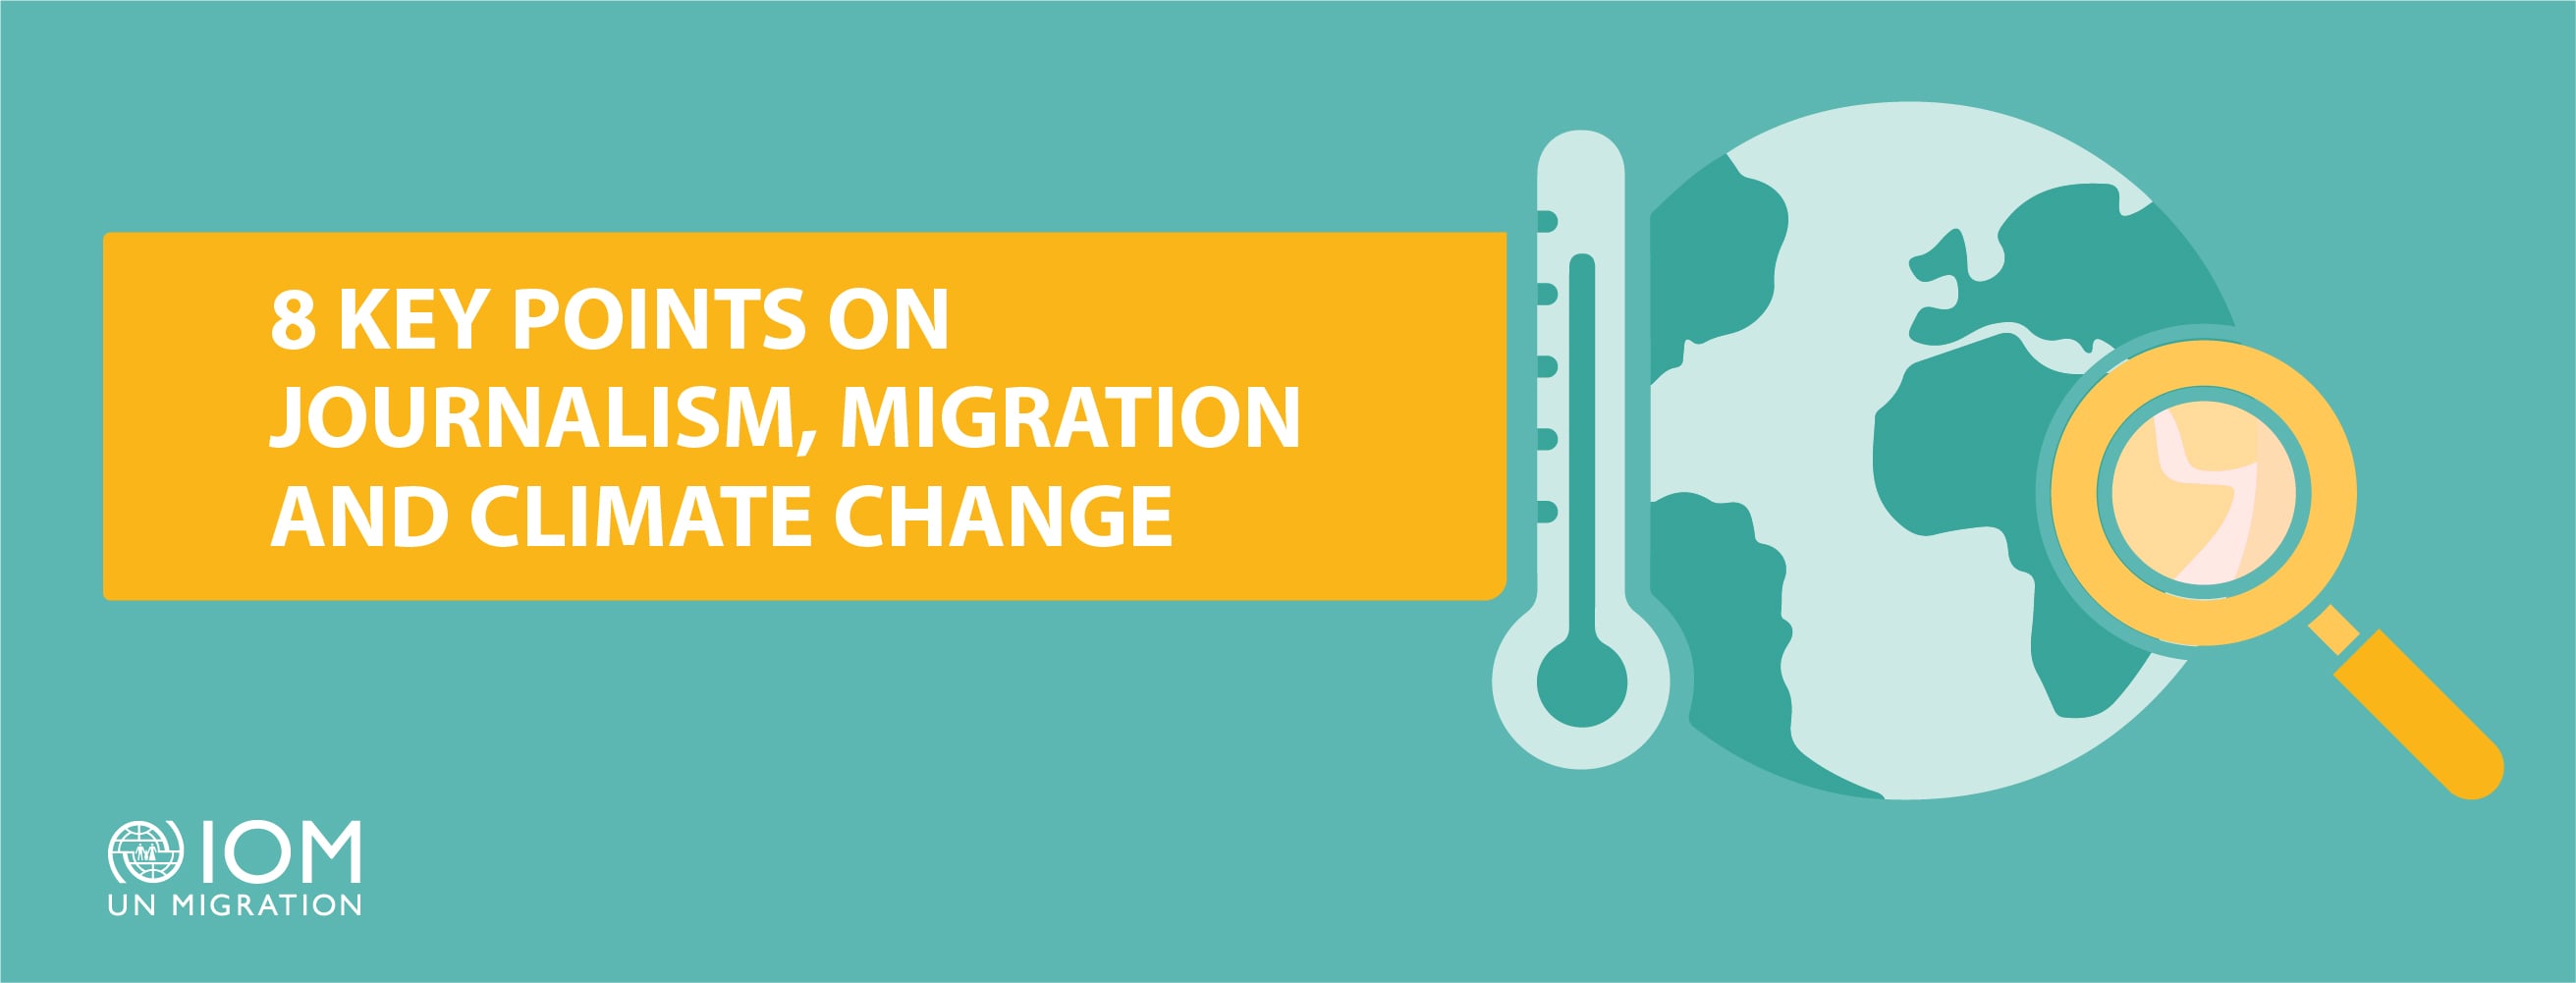 Download: 8 key points on journalism, migration and climate change